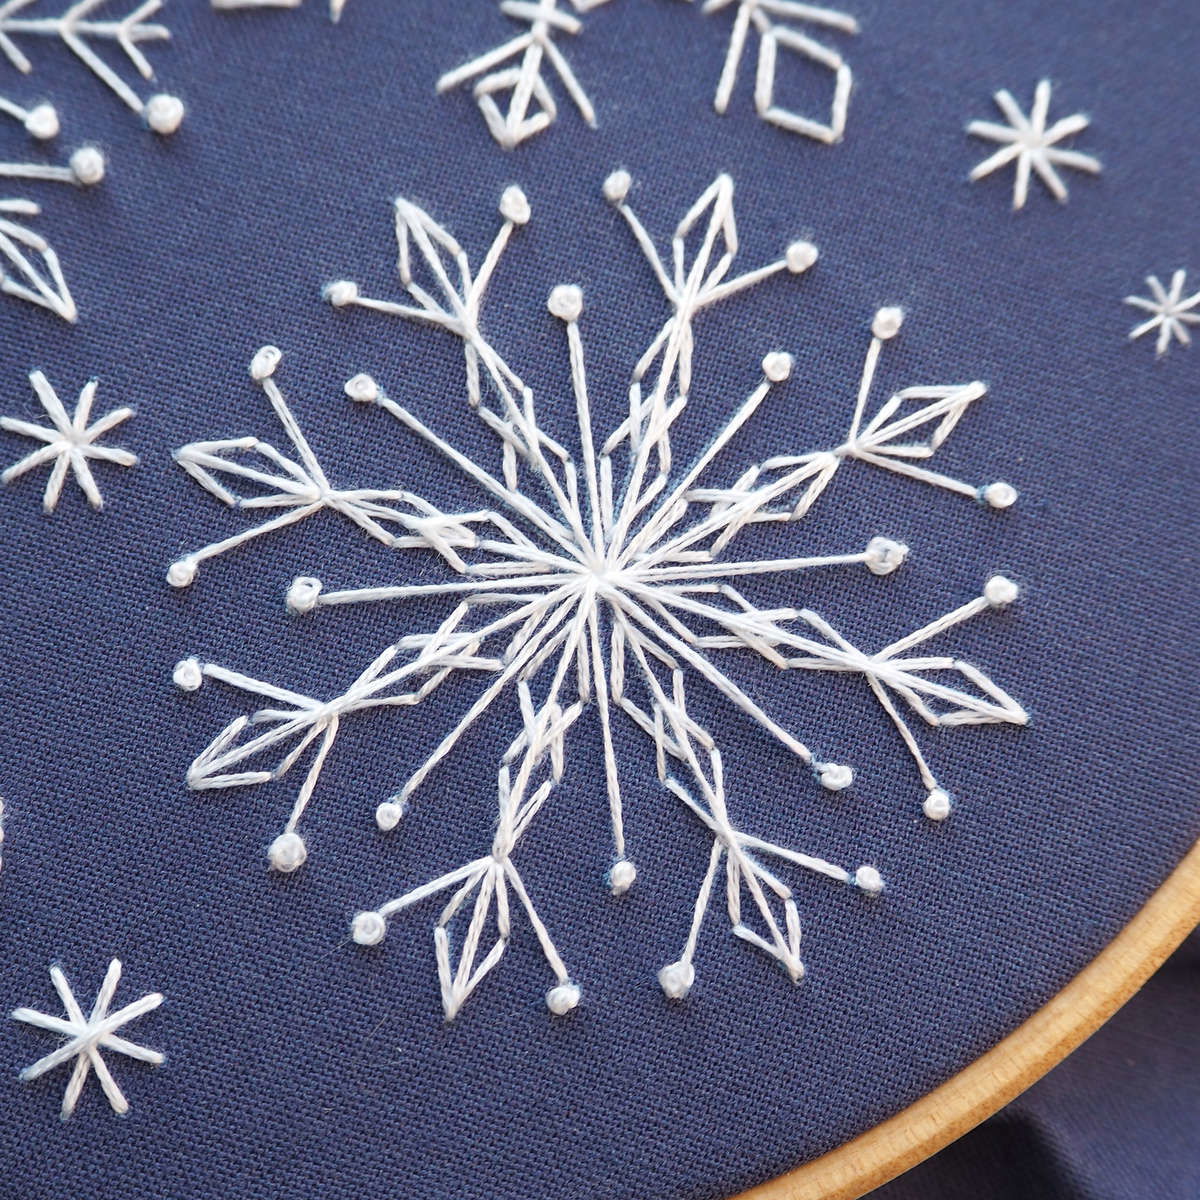 Snowflake Embroidered on blue fabric